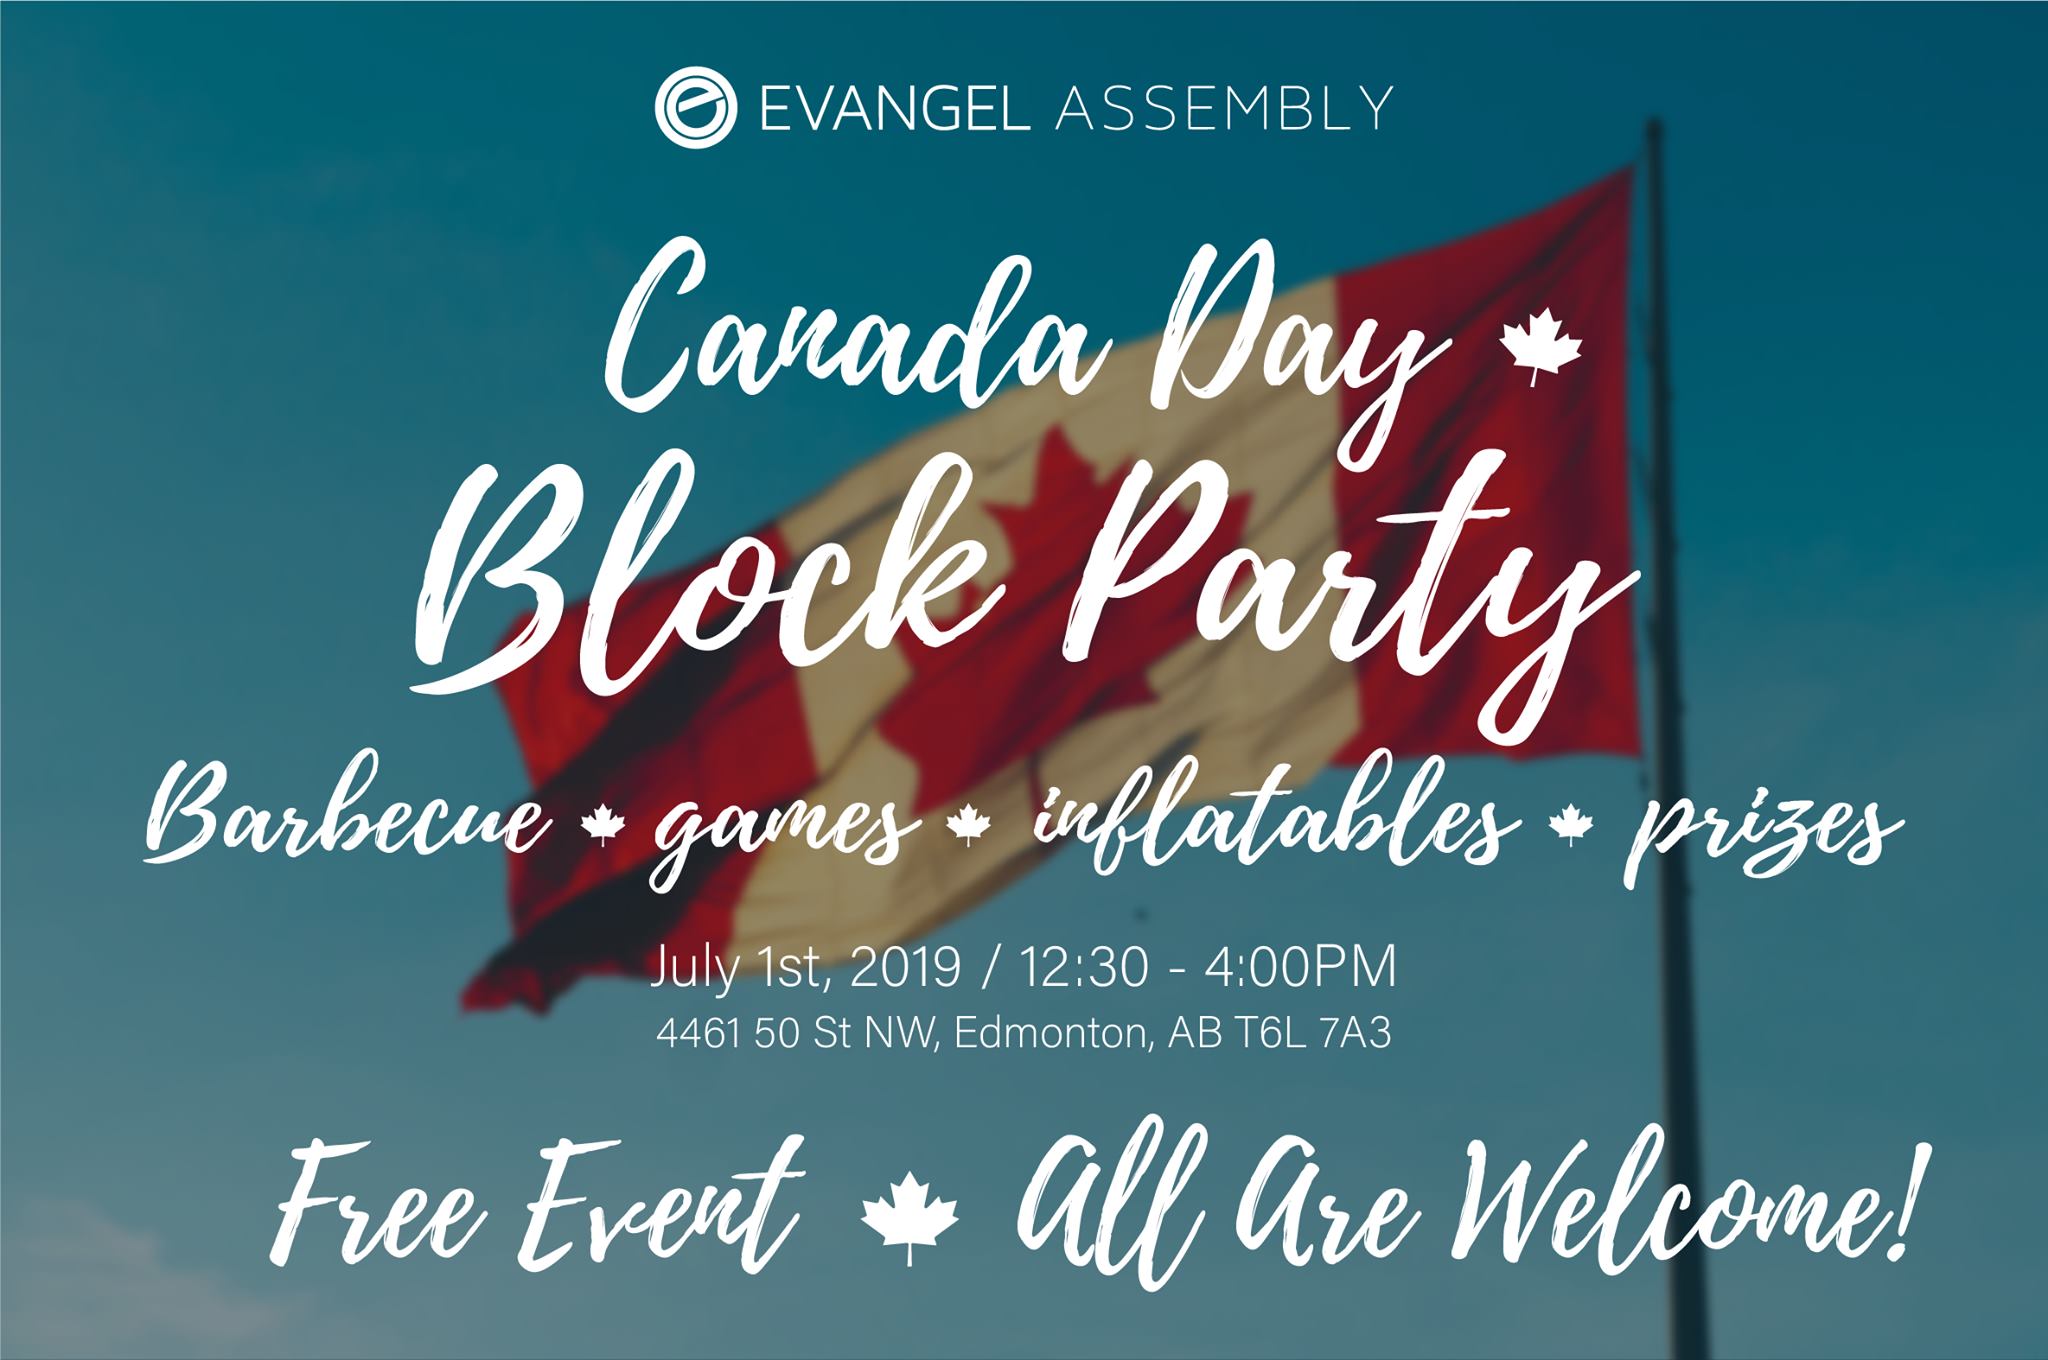 Canada Day Block Party